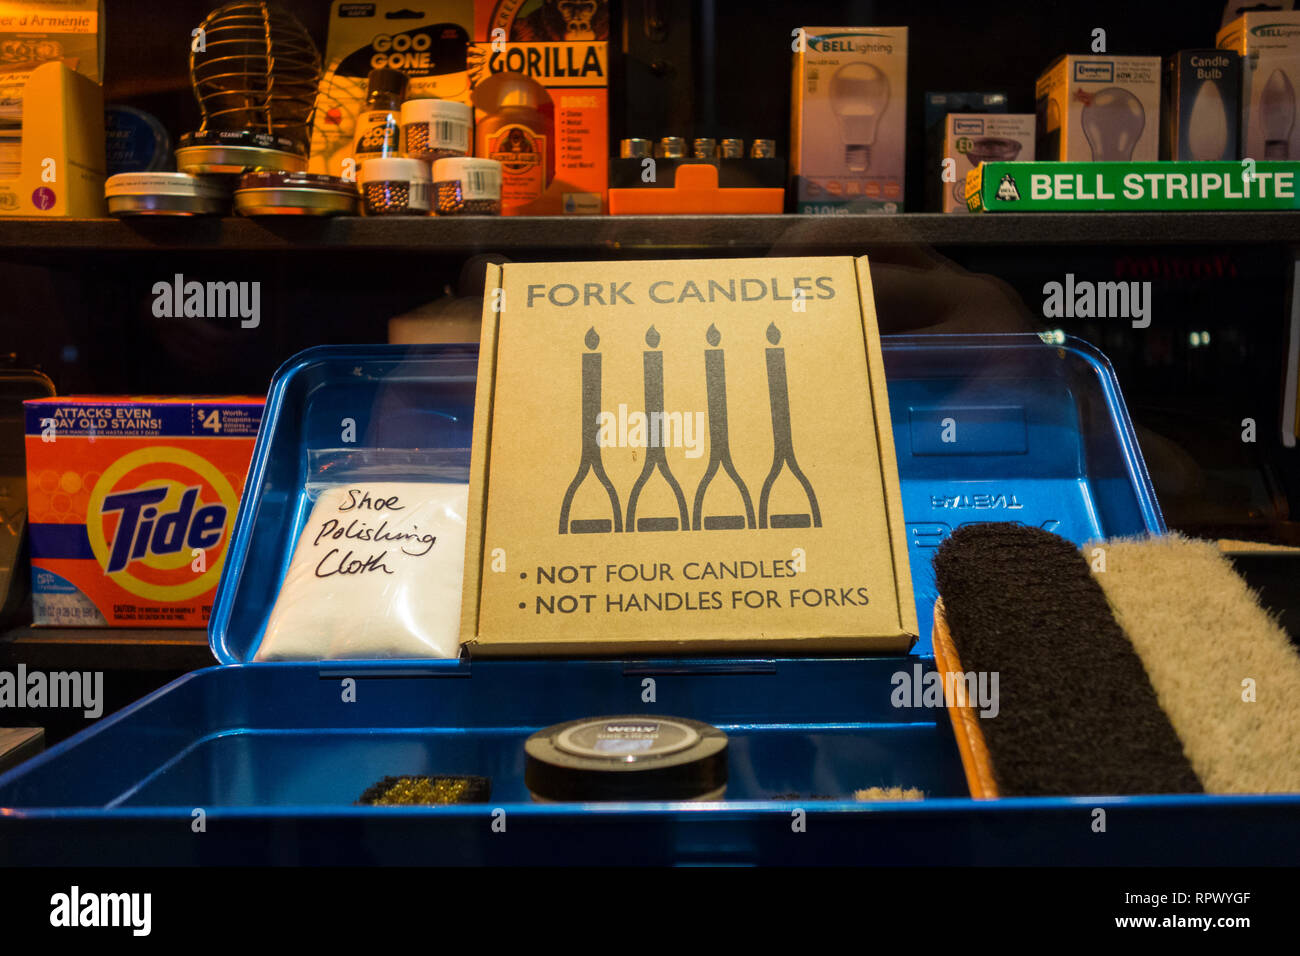 Fork Candles cardboard box and packaging in an ironmongers shop window Stock Photo